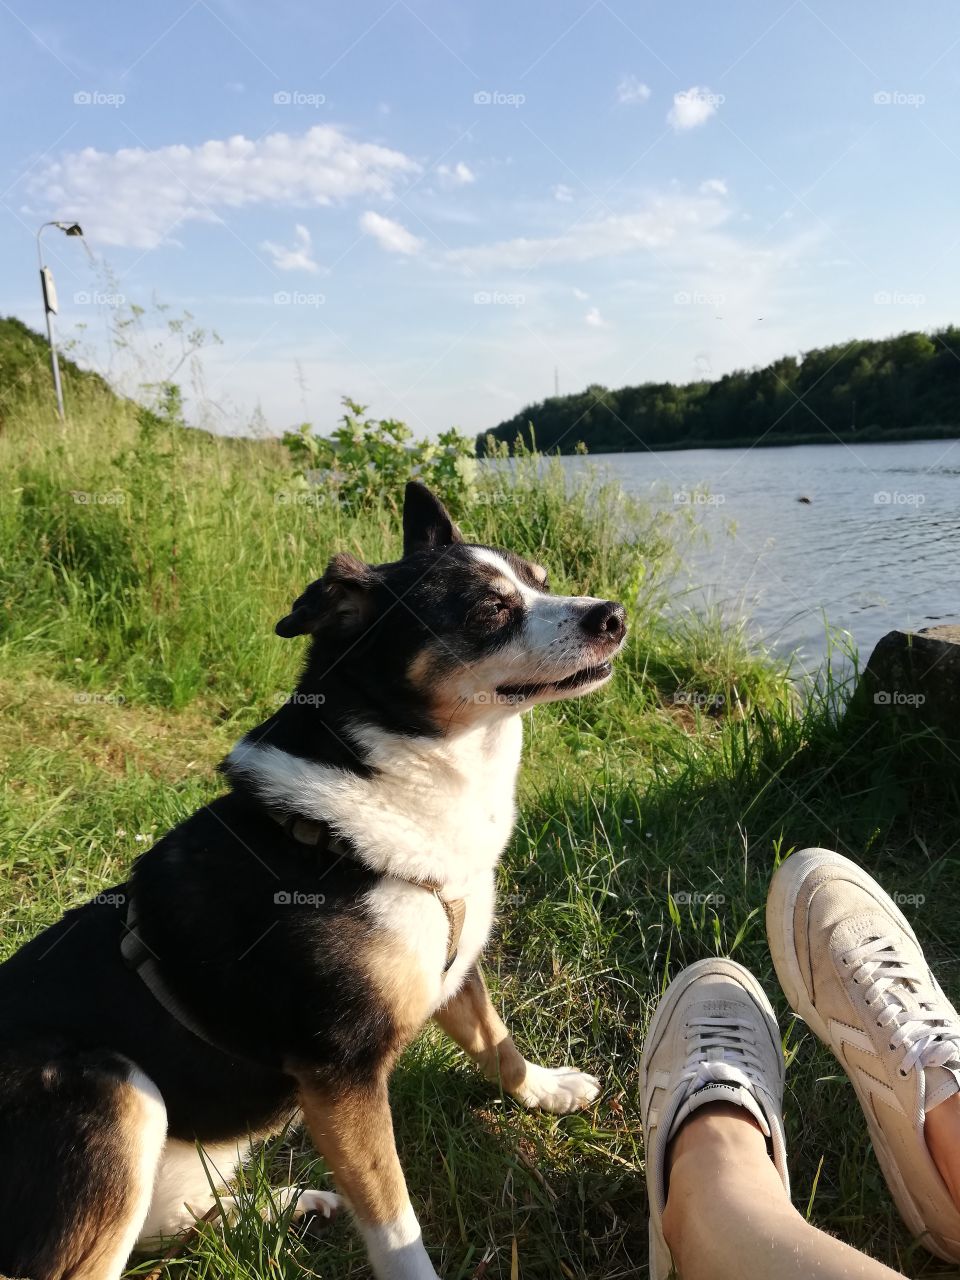 Dog relaxing by the water sneakers